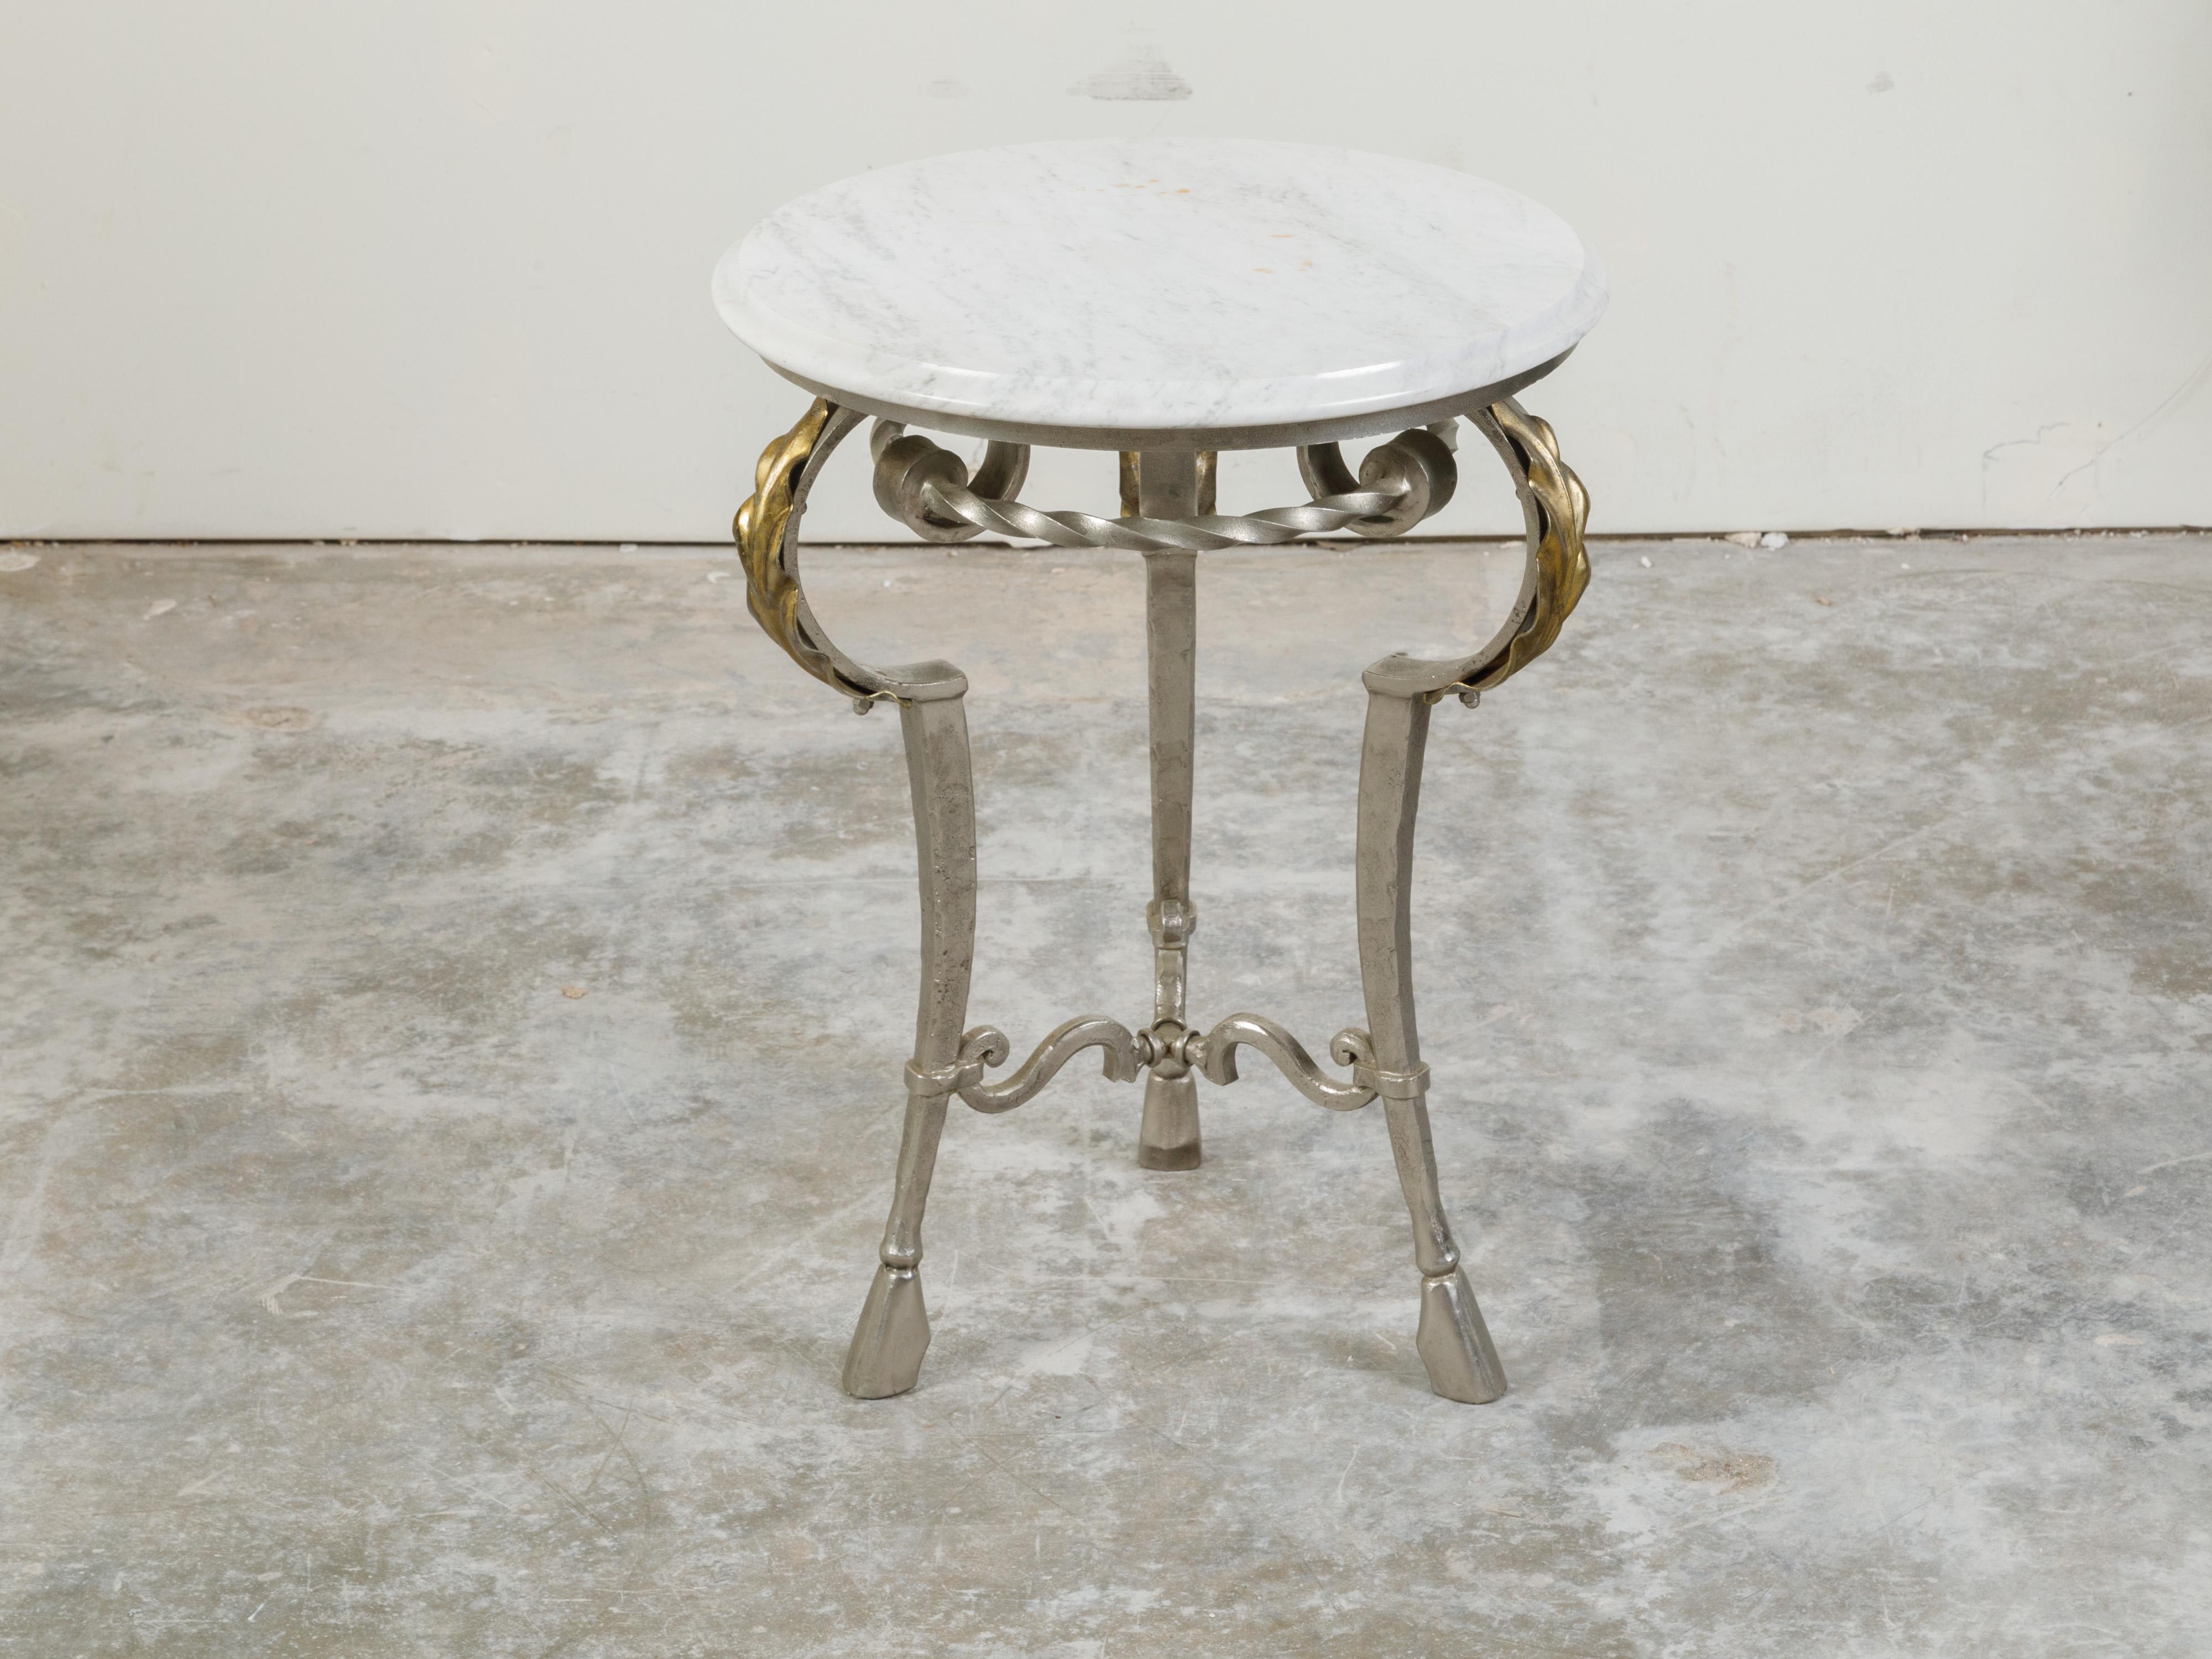 20th Century Italian Midcentury Steel Side Table with Circular White Marble Top and Hoof Feet For Sale